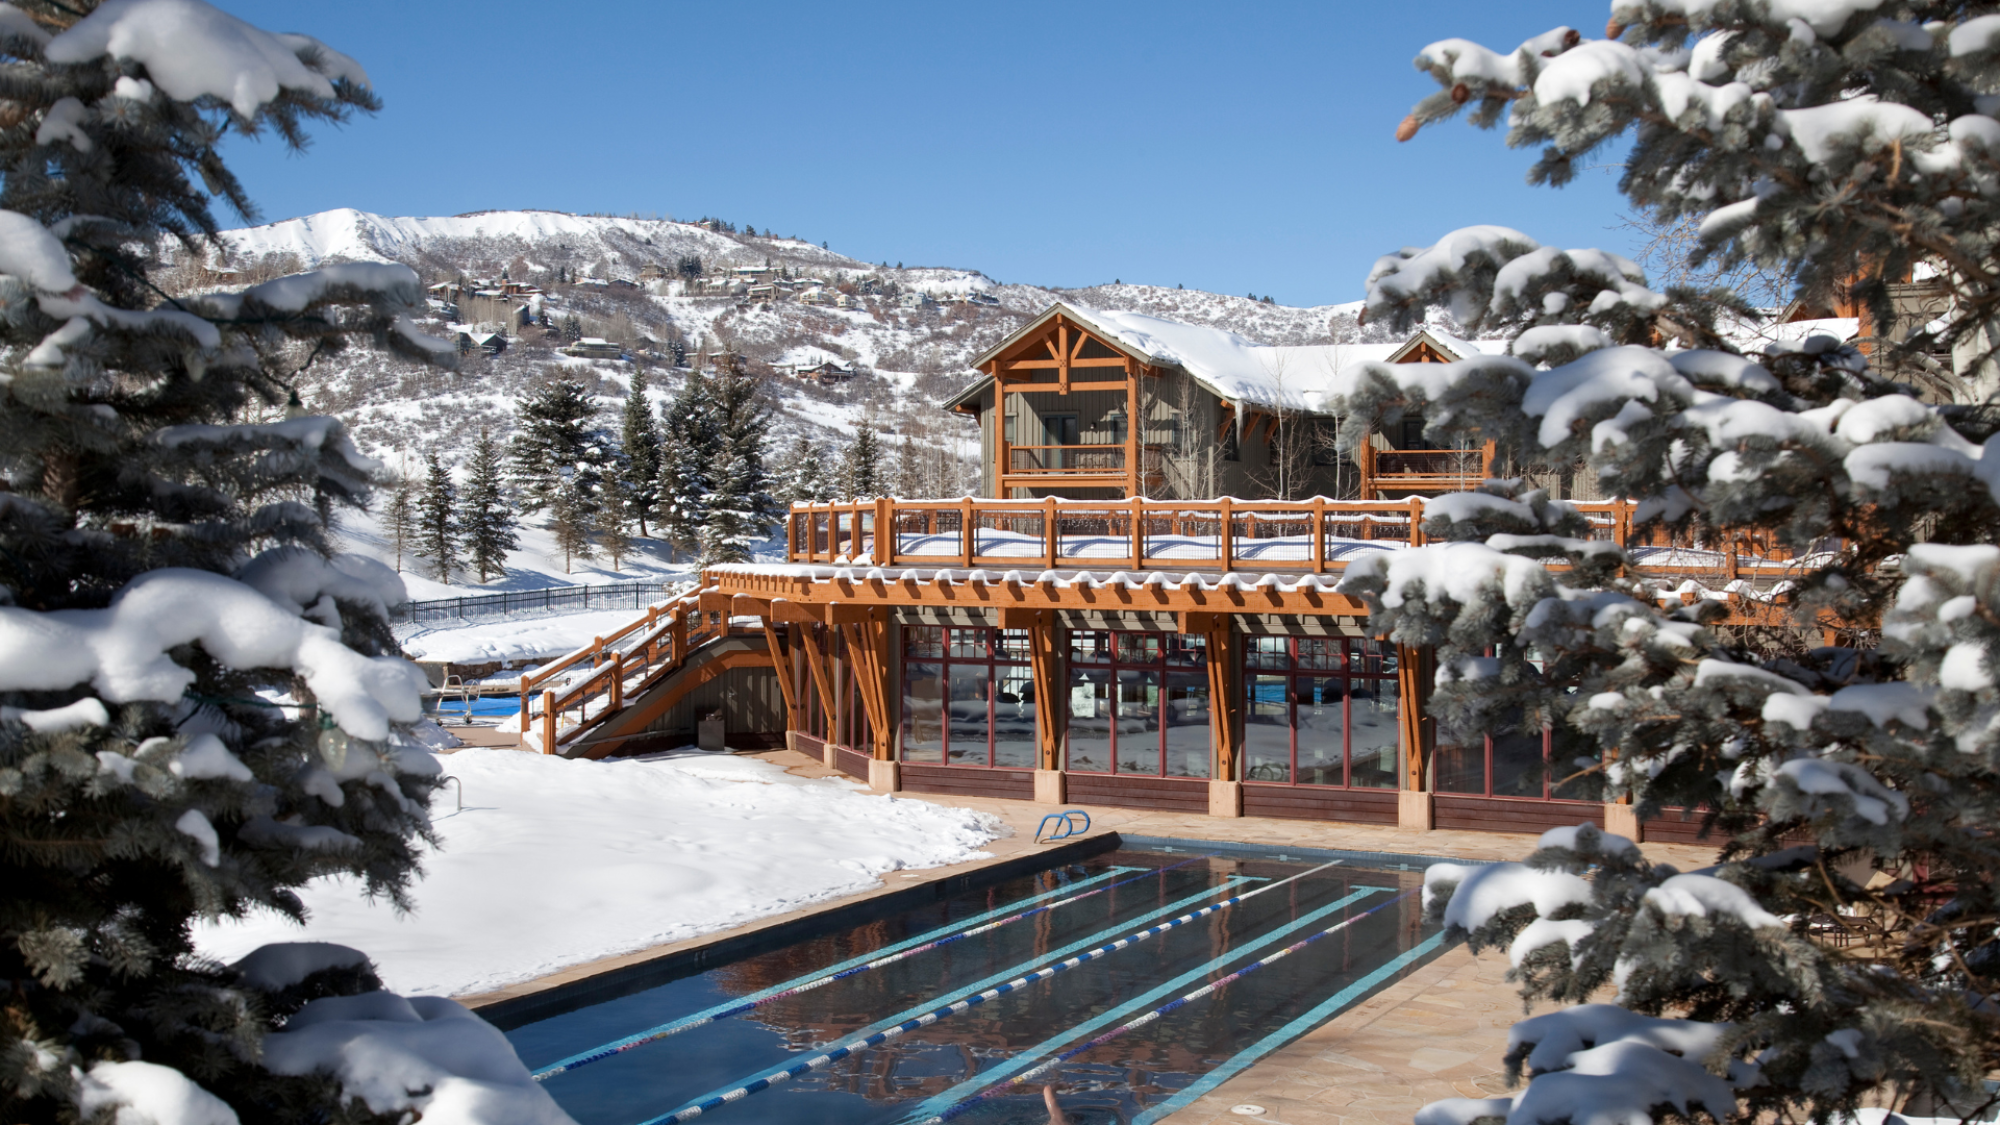 A snowy mountain scene featuring a wooden lodge and a swimming pool, surrounded by trees covered in snow, with clear blue skies overhead.